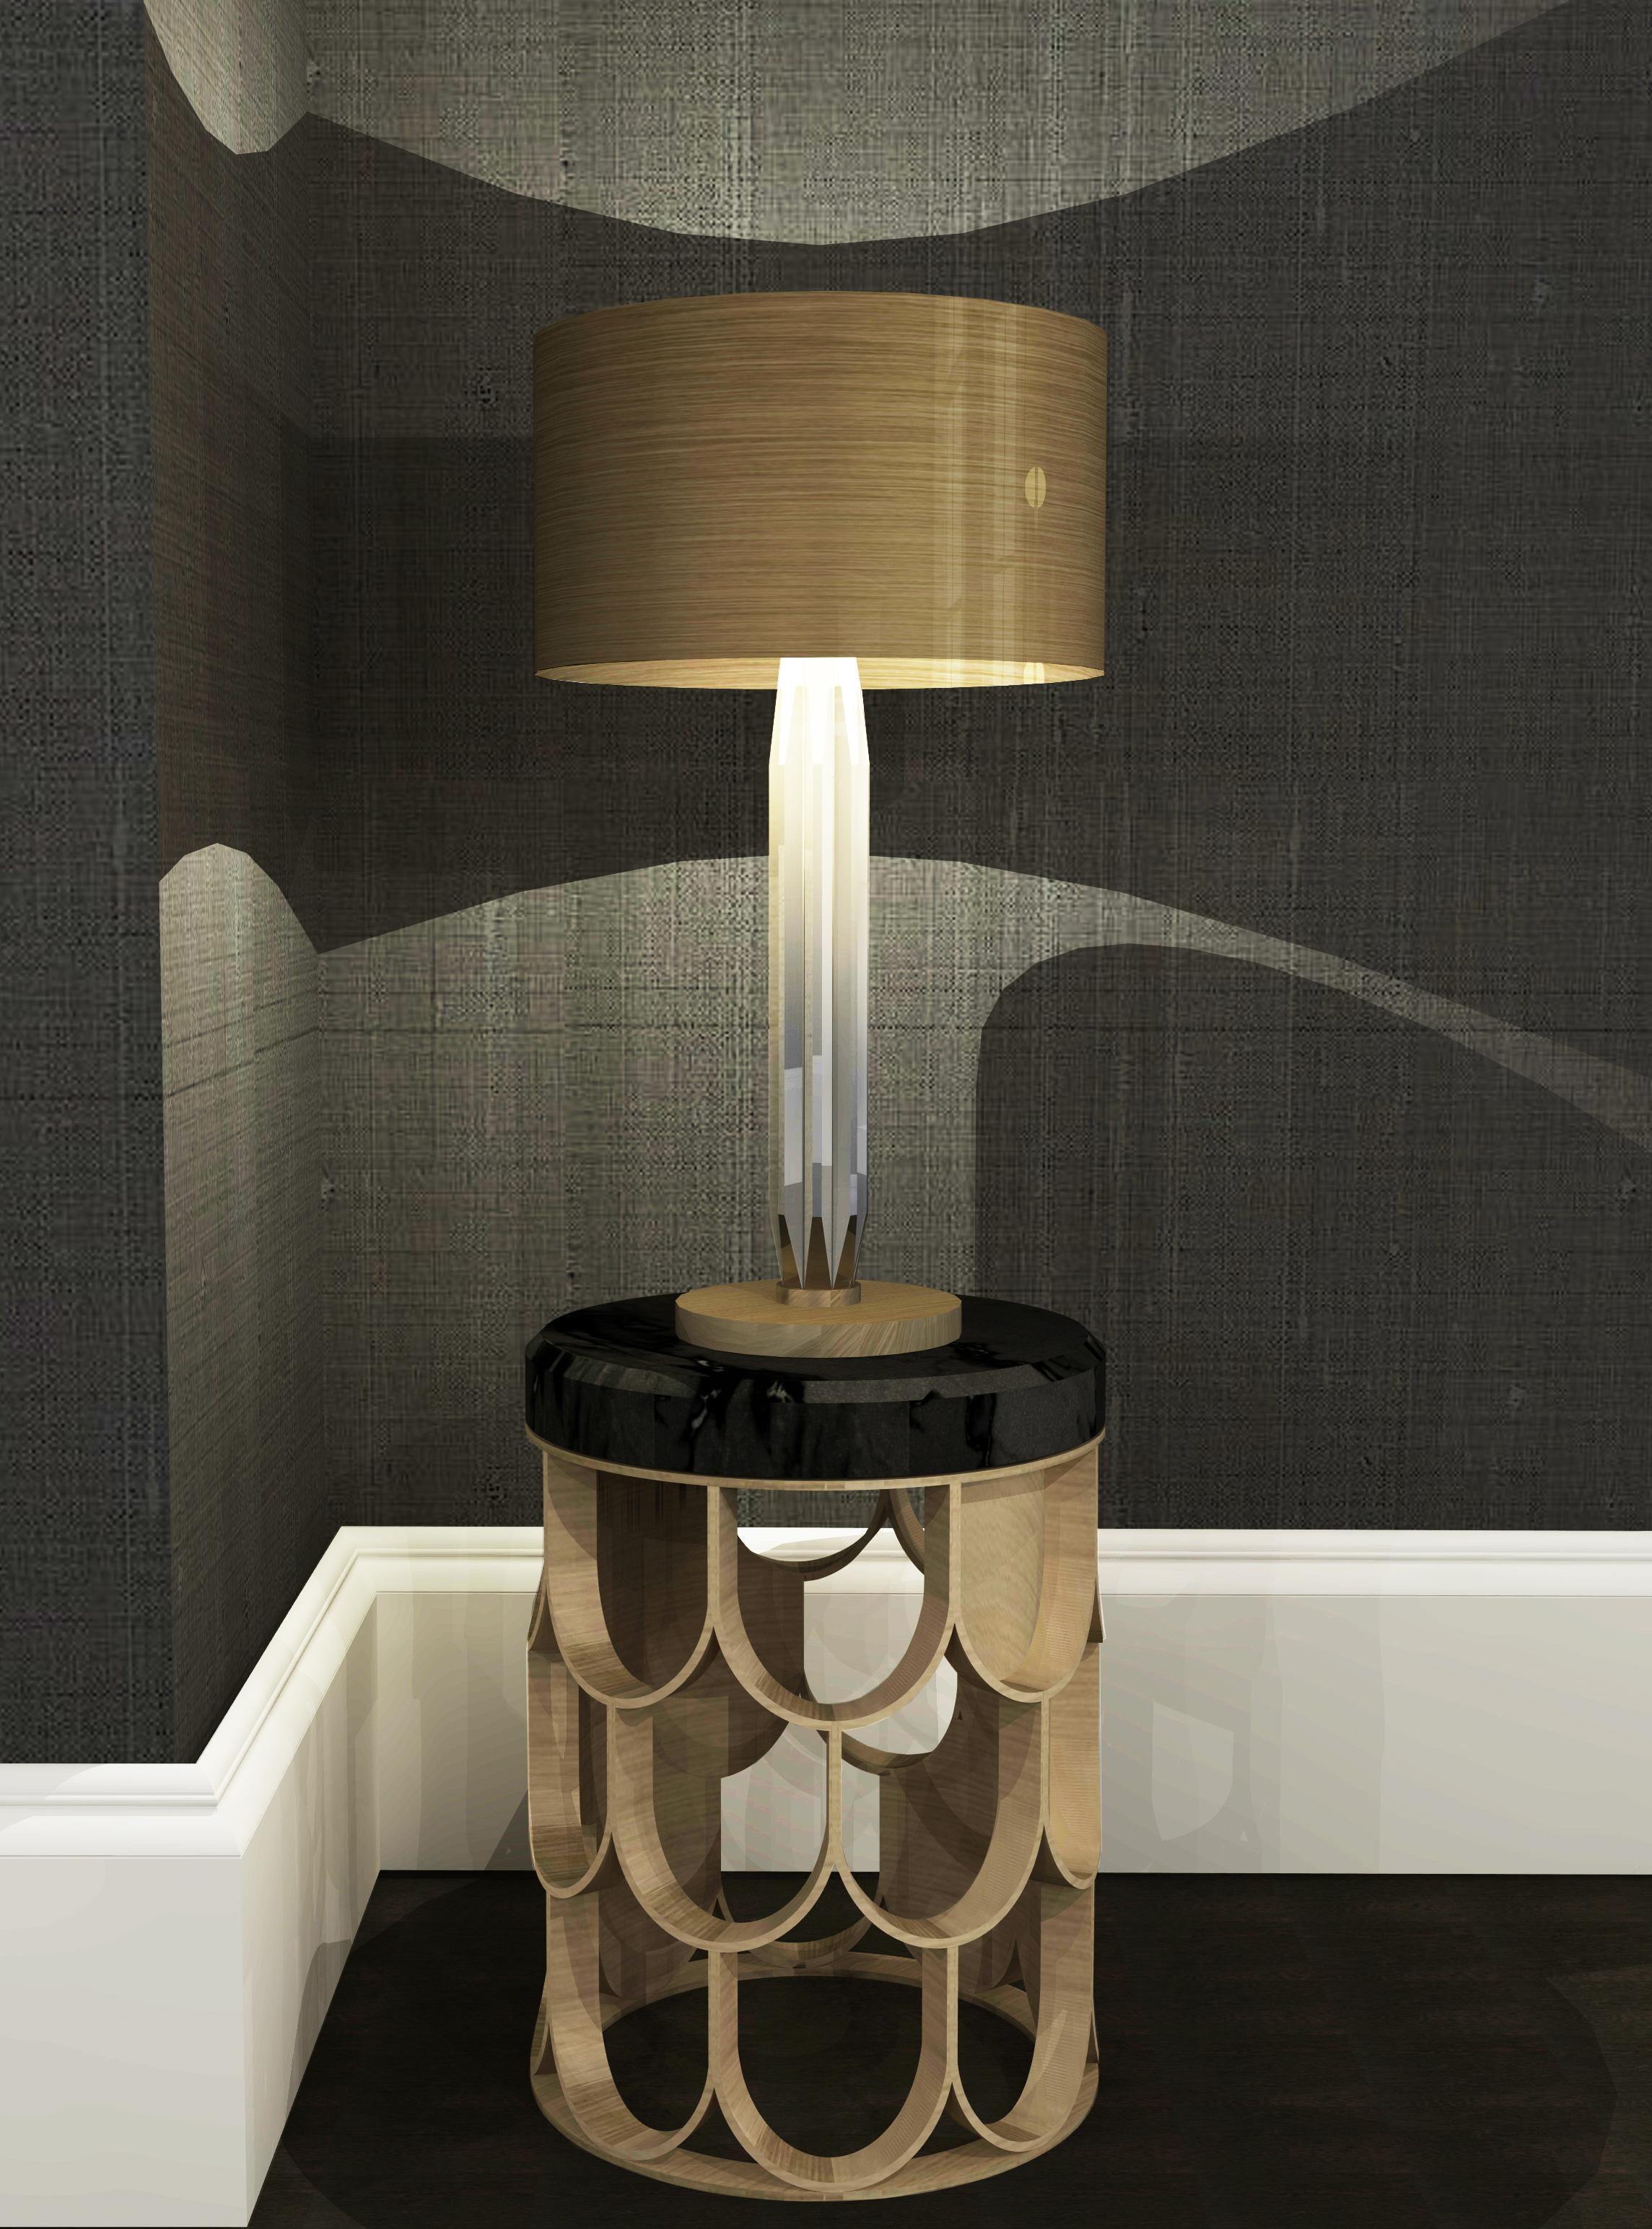 This table lamp uses a mix of bold materials, brushed brass band and over-sized crystal elements, to give impact whilst remaining clean and classic. The designs cool, clean, beveled-edge crystals give a beautiful reflection and transparency, whilst